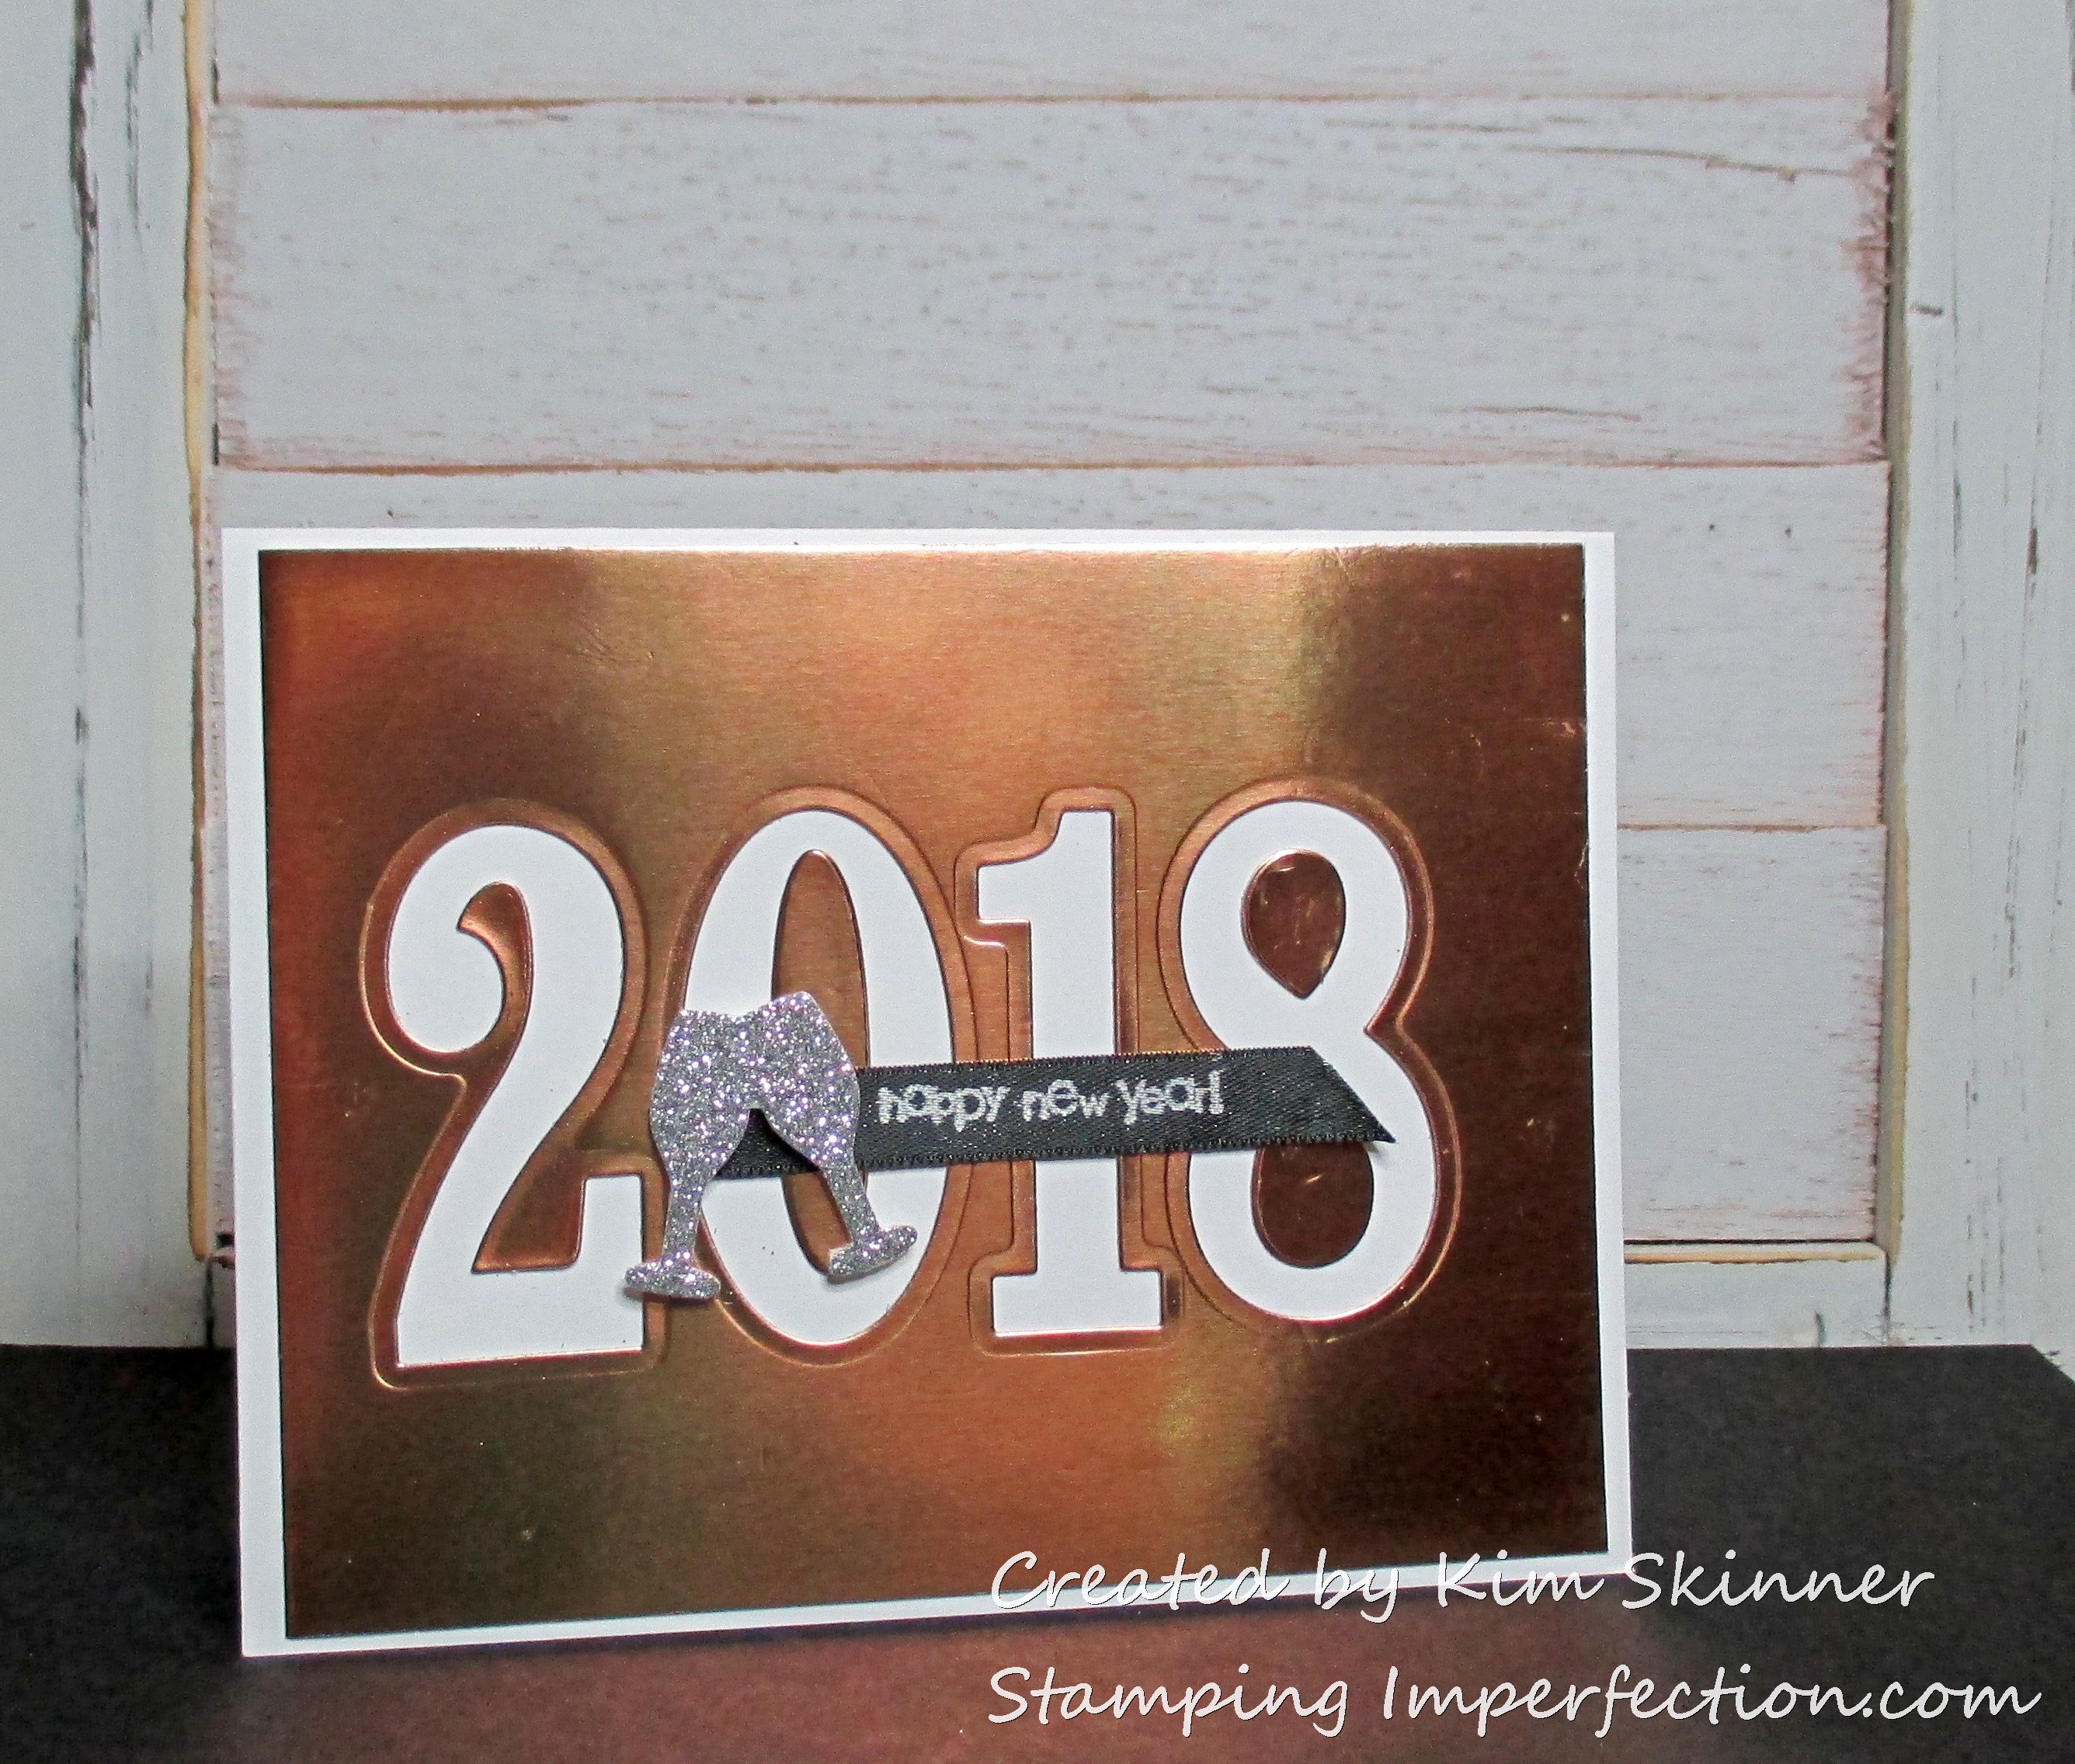 Stamping Imperfection CAS New Year 2